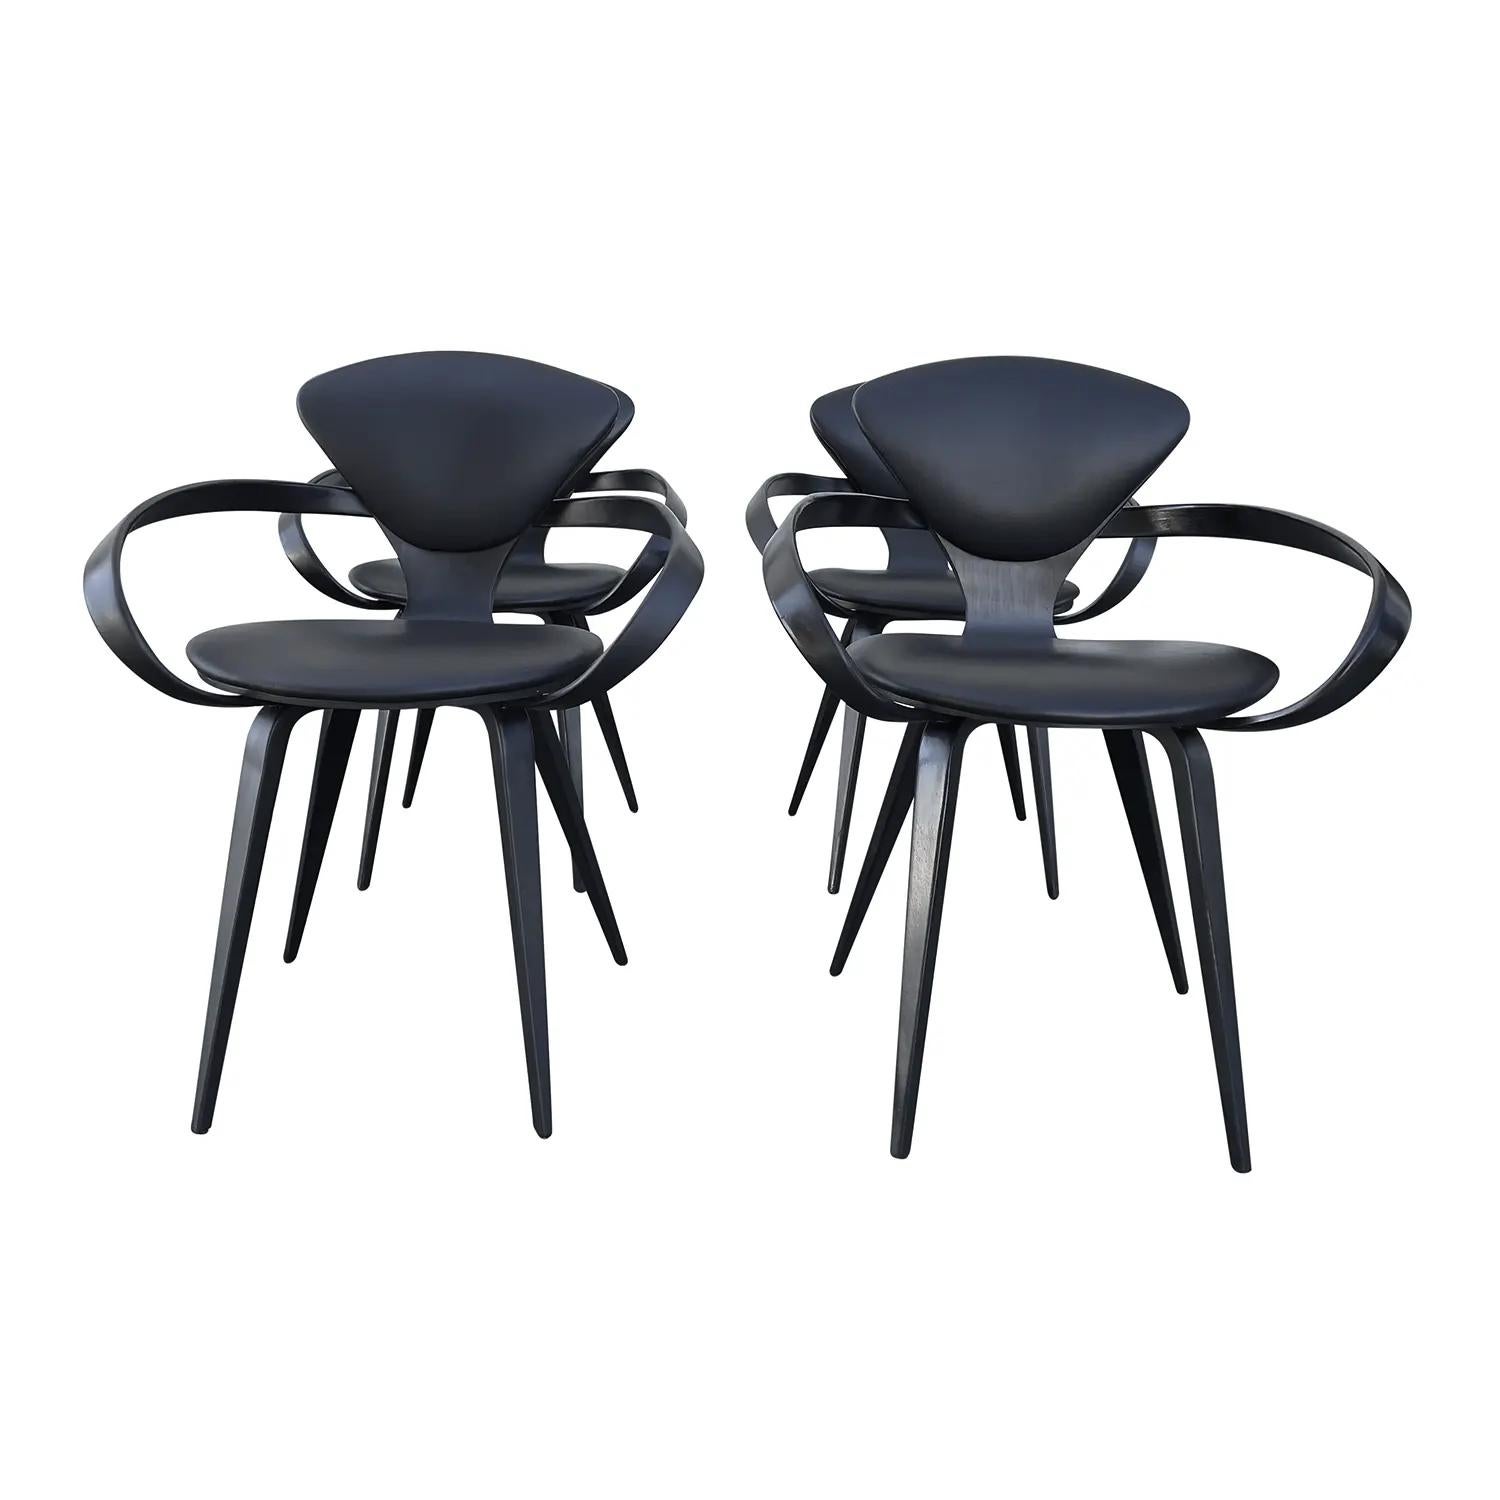 A black, vintage Mid-Century Modern America set of four Pretzel dining chairs made of hand crafted polyurethane foam, designed by Norman Cherner and produced by Plycraft, in good condition. The seat backrest of the armchairs, side chairs are